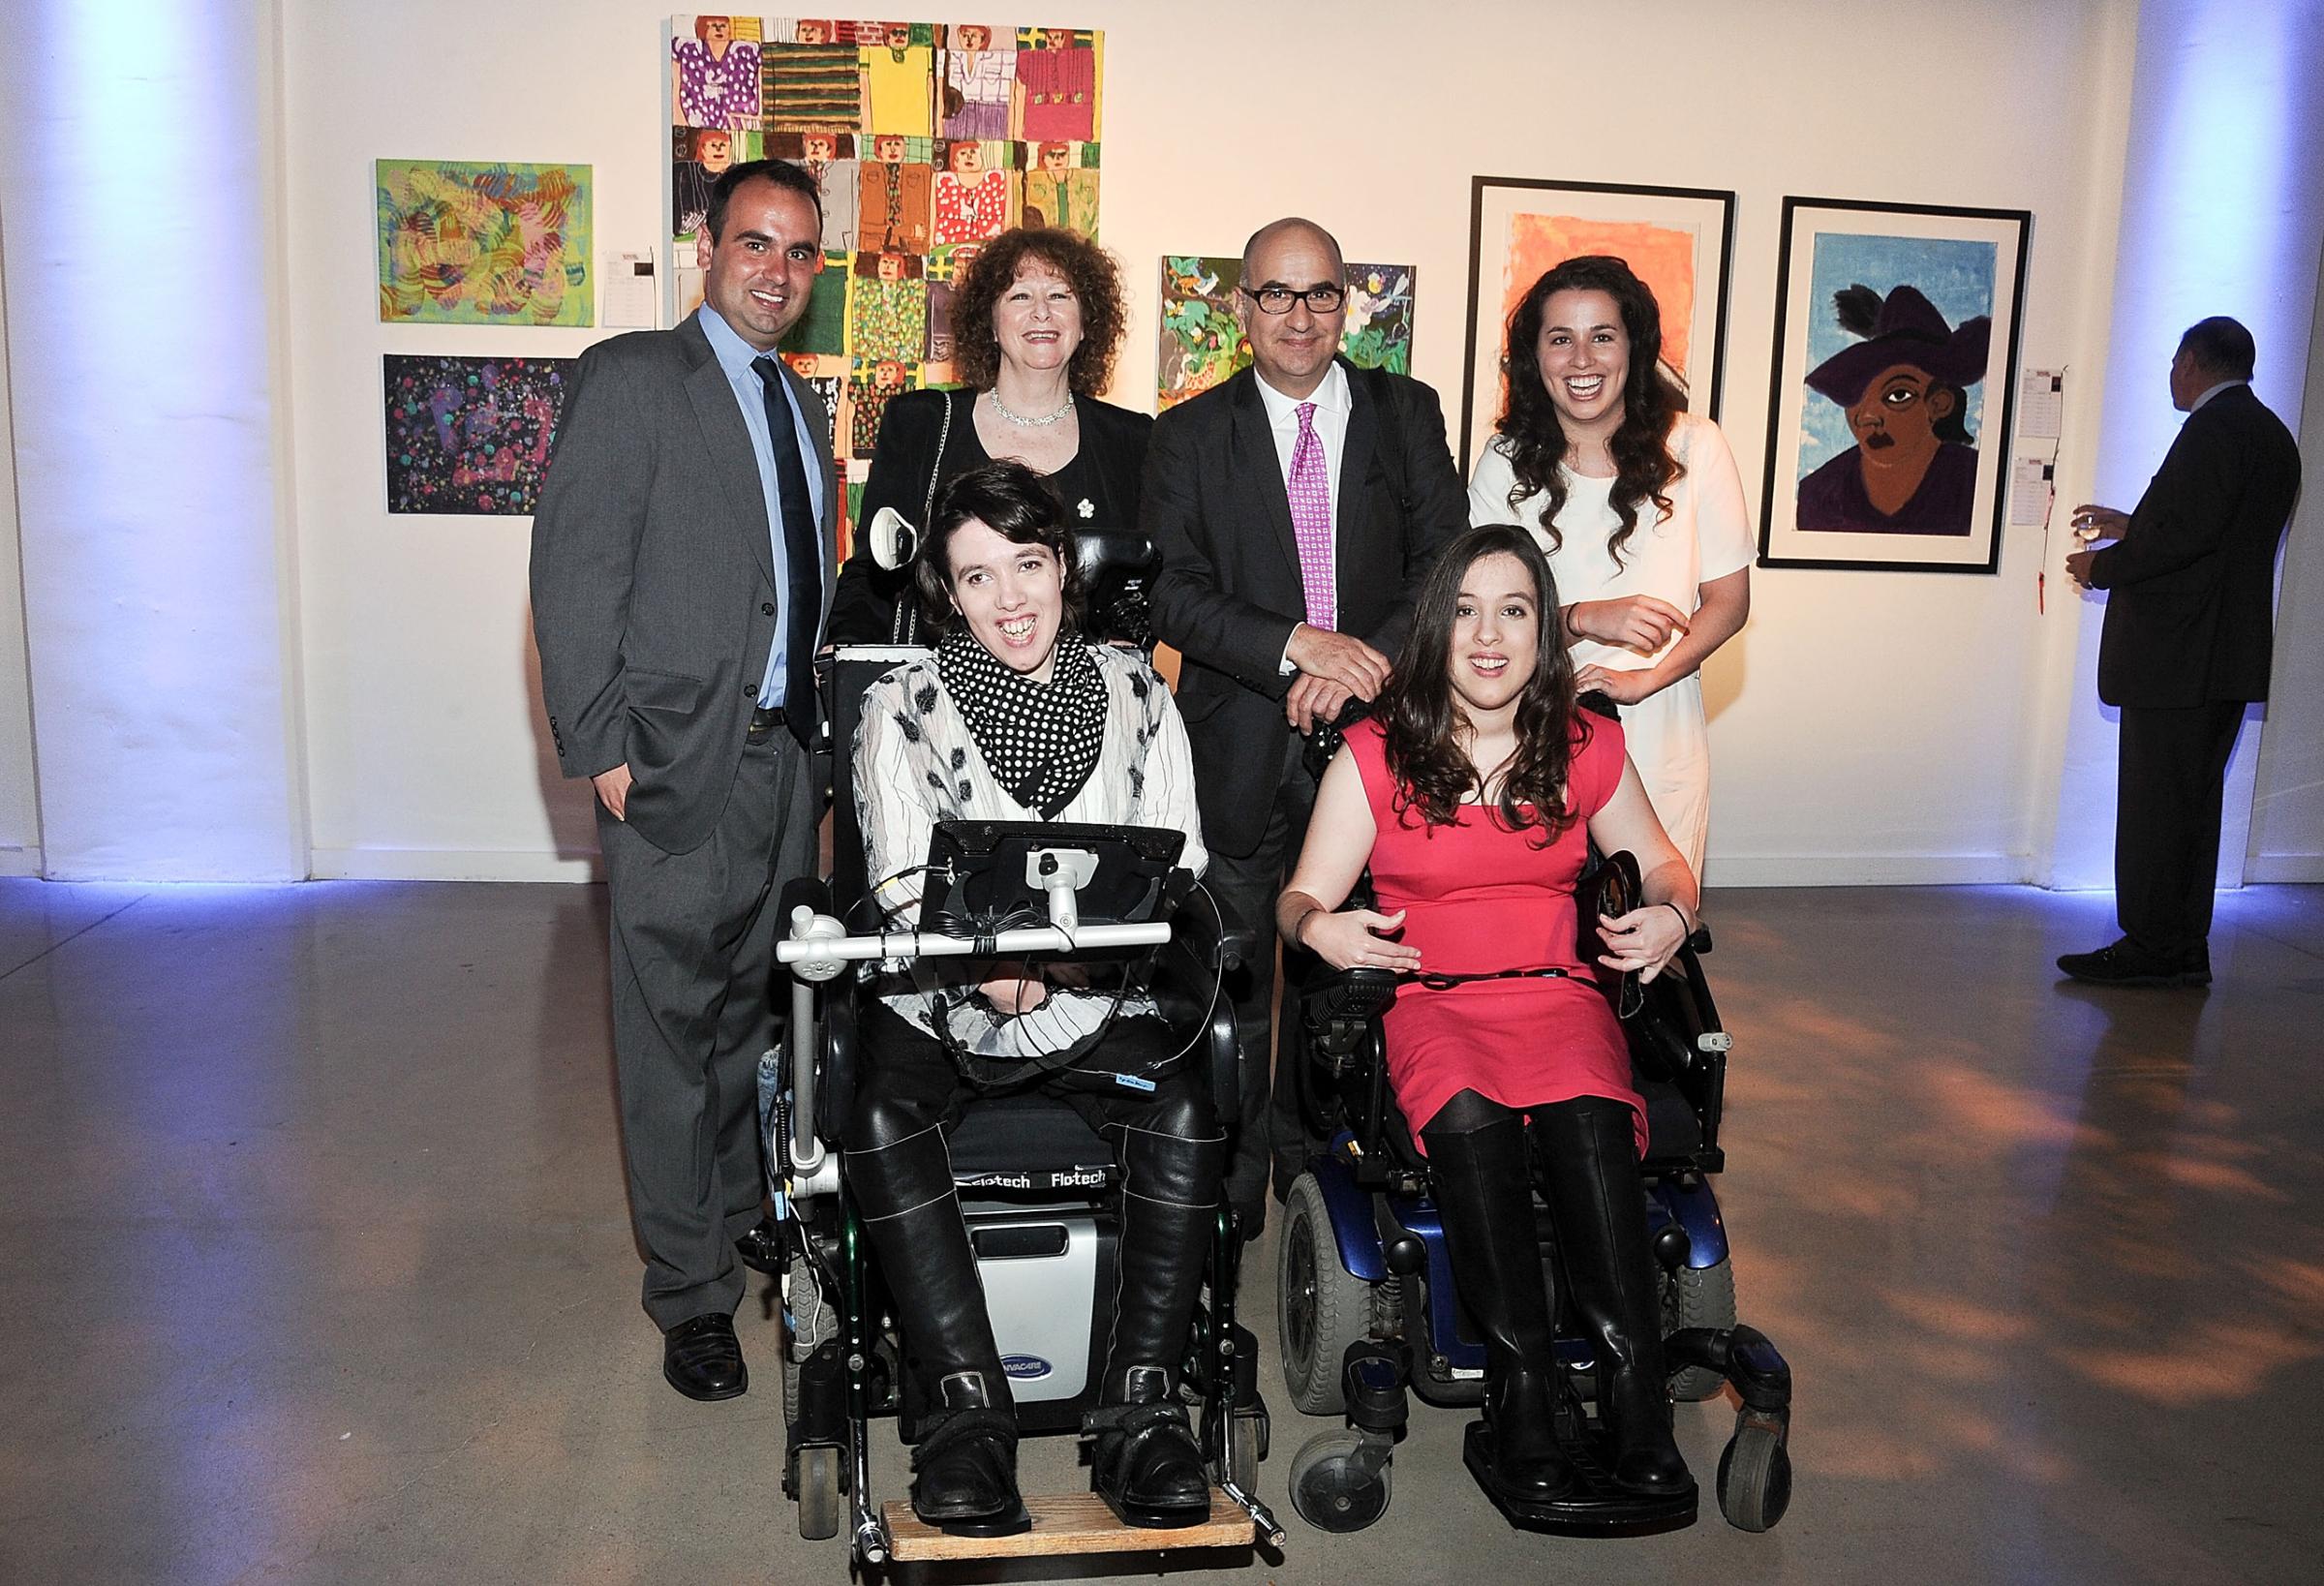 Oliver Somoza, Mary Somoza, Gerardo Somoza, Gabriella Somoza, Alba Somoza and Anastasia Somoza attend the The Shield Institute and Pure Vision Arts Celebration at Metropolitan West on May 6, 2015 in New York City.